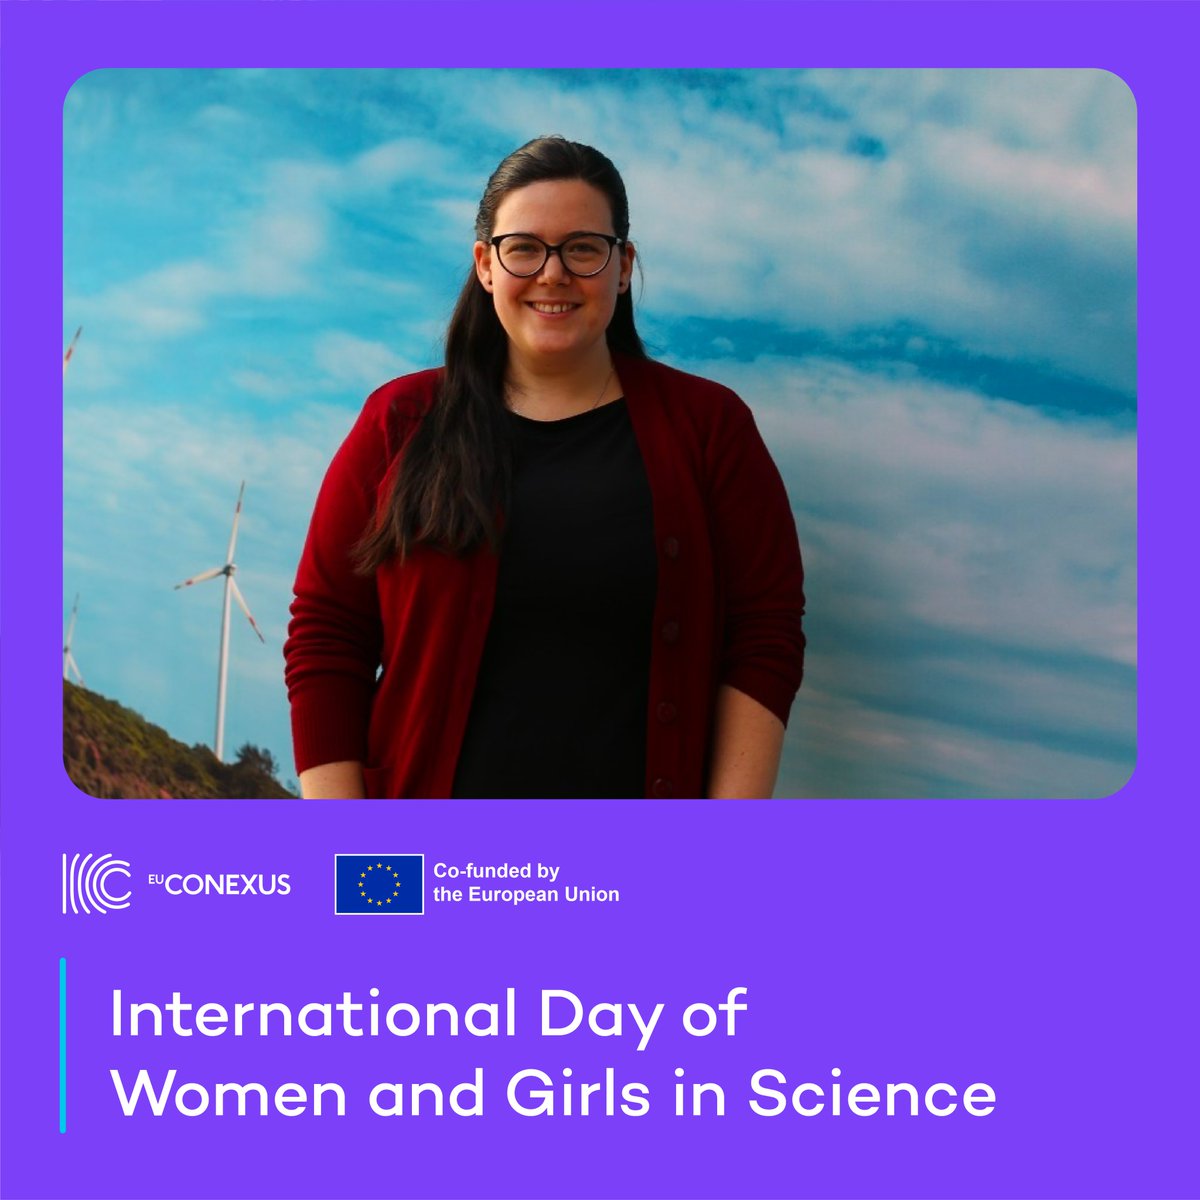 @UN Ioana Teodorescu 👩‍🔬#womeninscience from @UTCB_RO expertise areas are #civilengineering & Wood Science. “I encourage the young generation of girls to pursue a career in research in any field, but if they choose this one, they can be sure that it is one of the future'